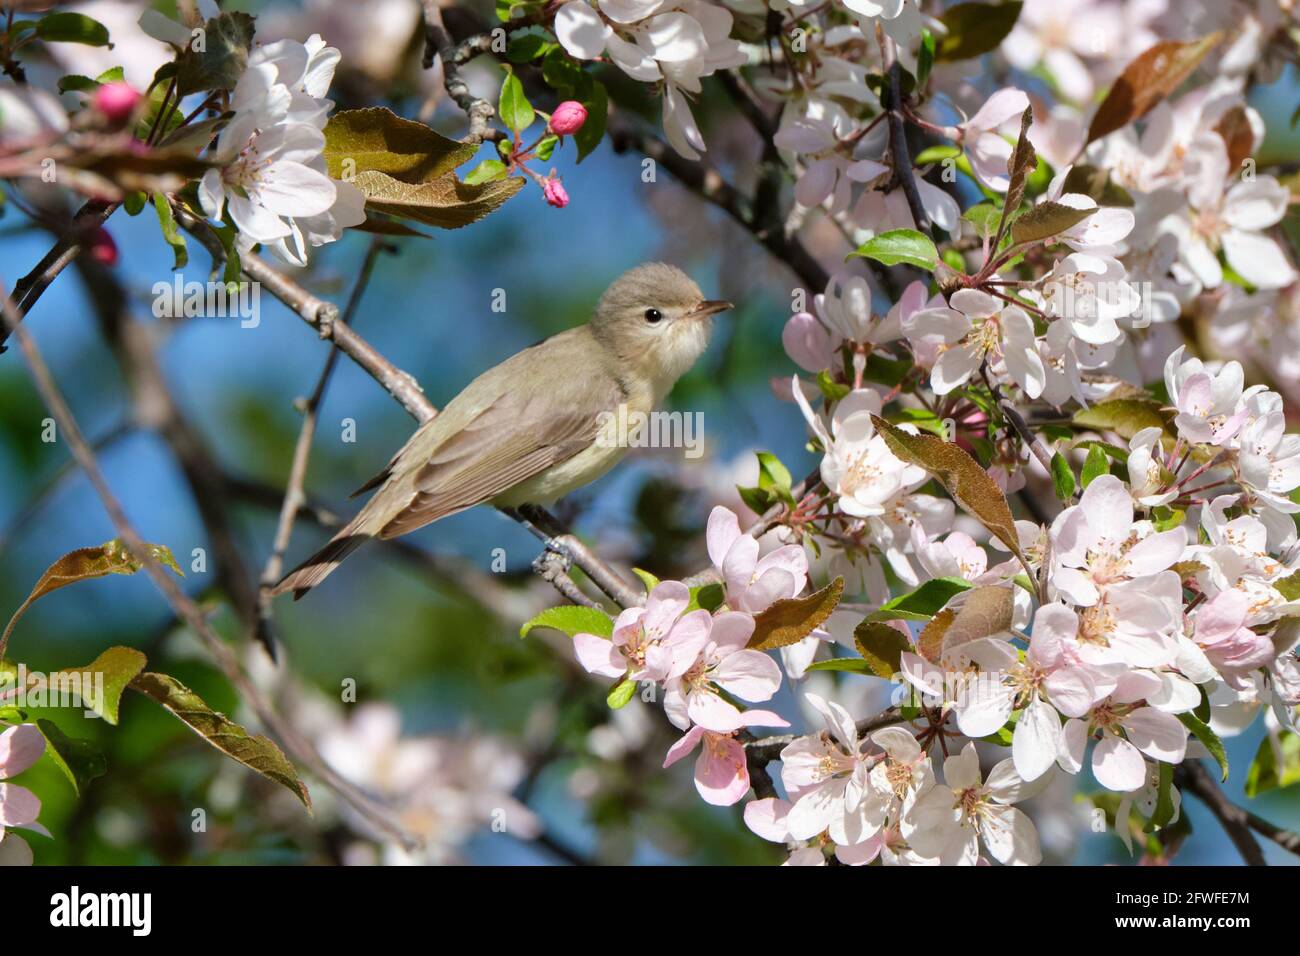 Adult Warbling Vireo, Vireo gilvus, perched sitting in a blooming crab apple tree Stock Photo